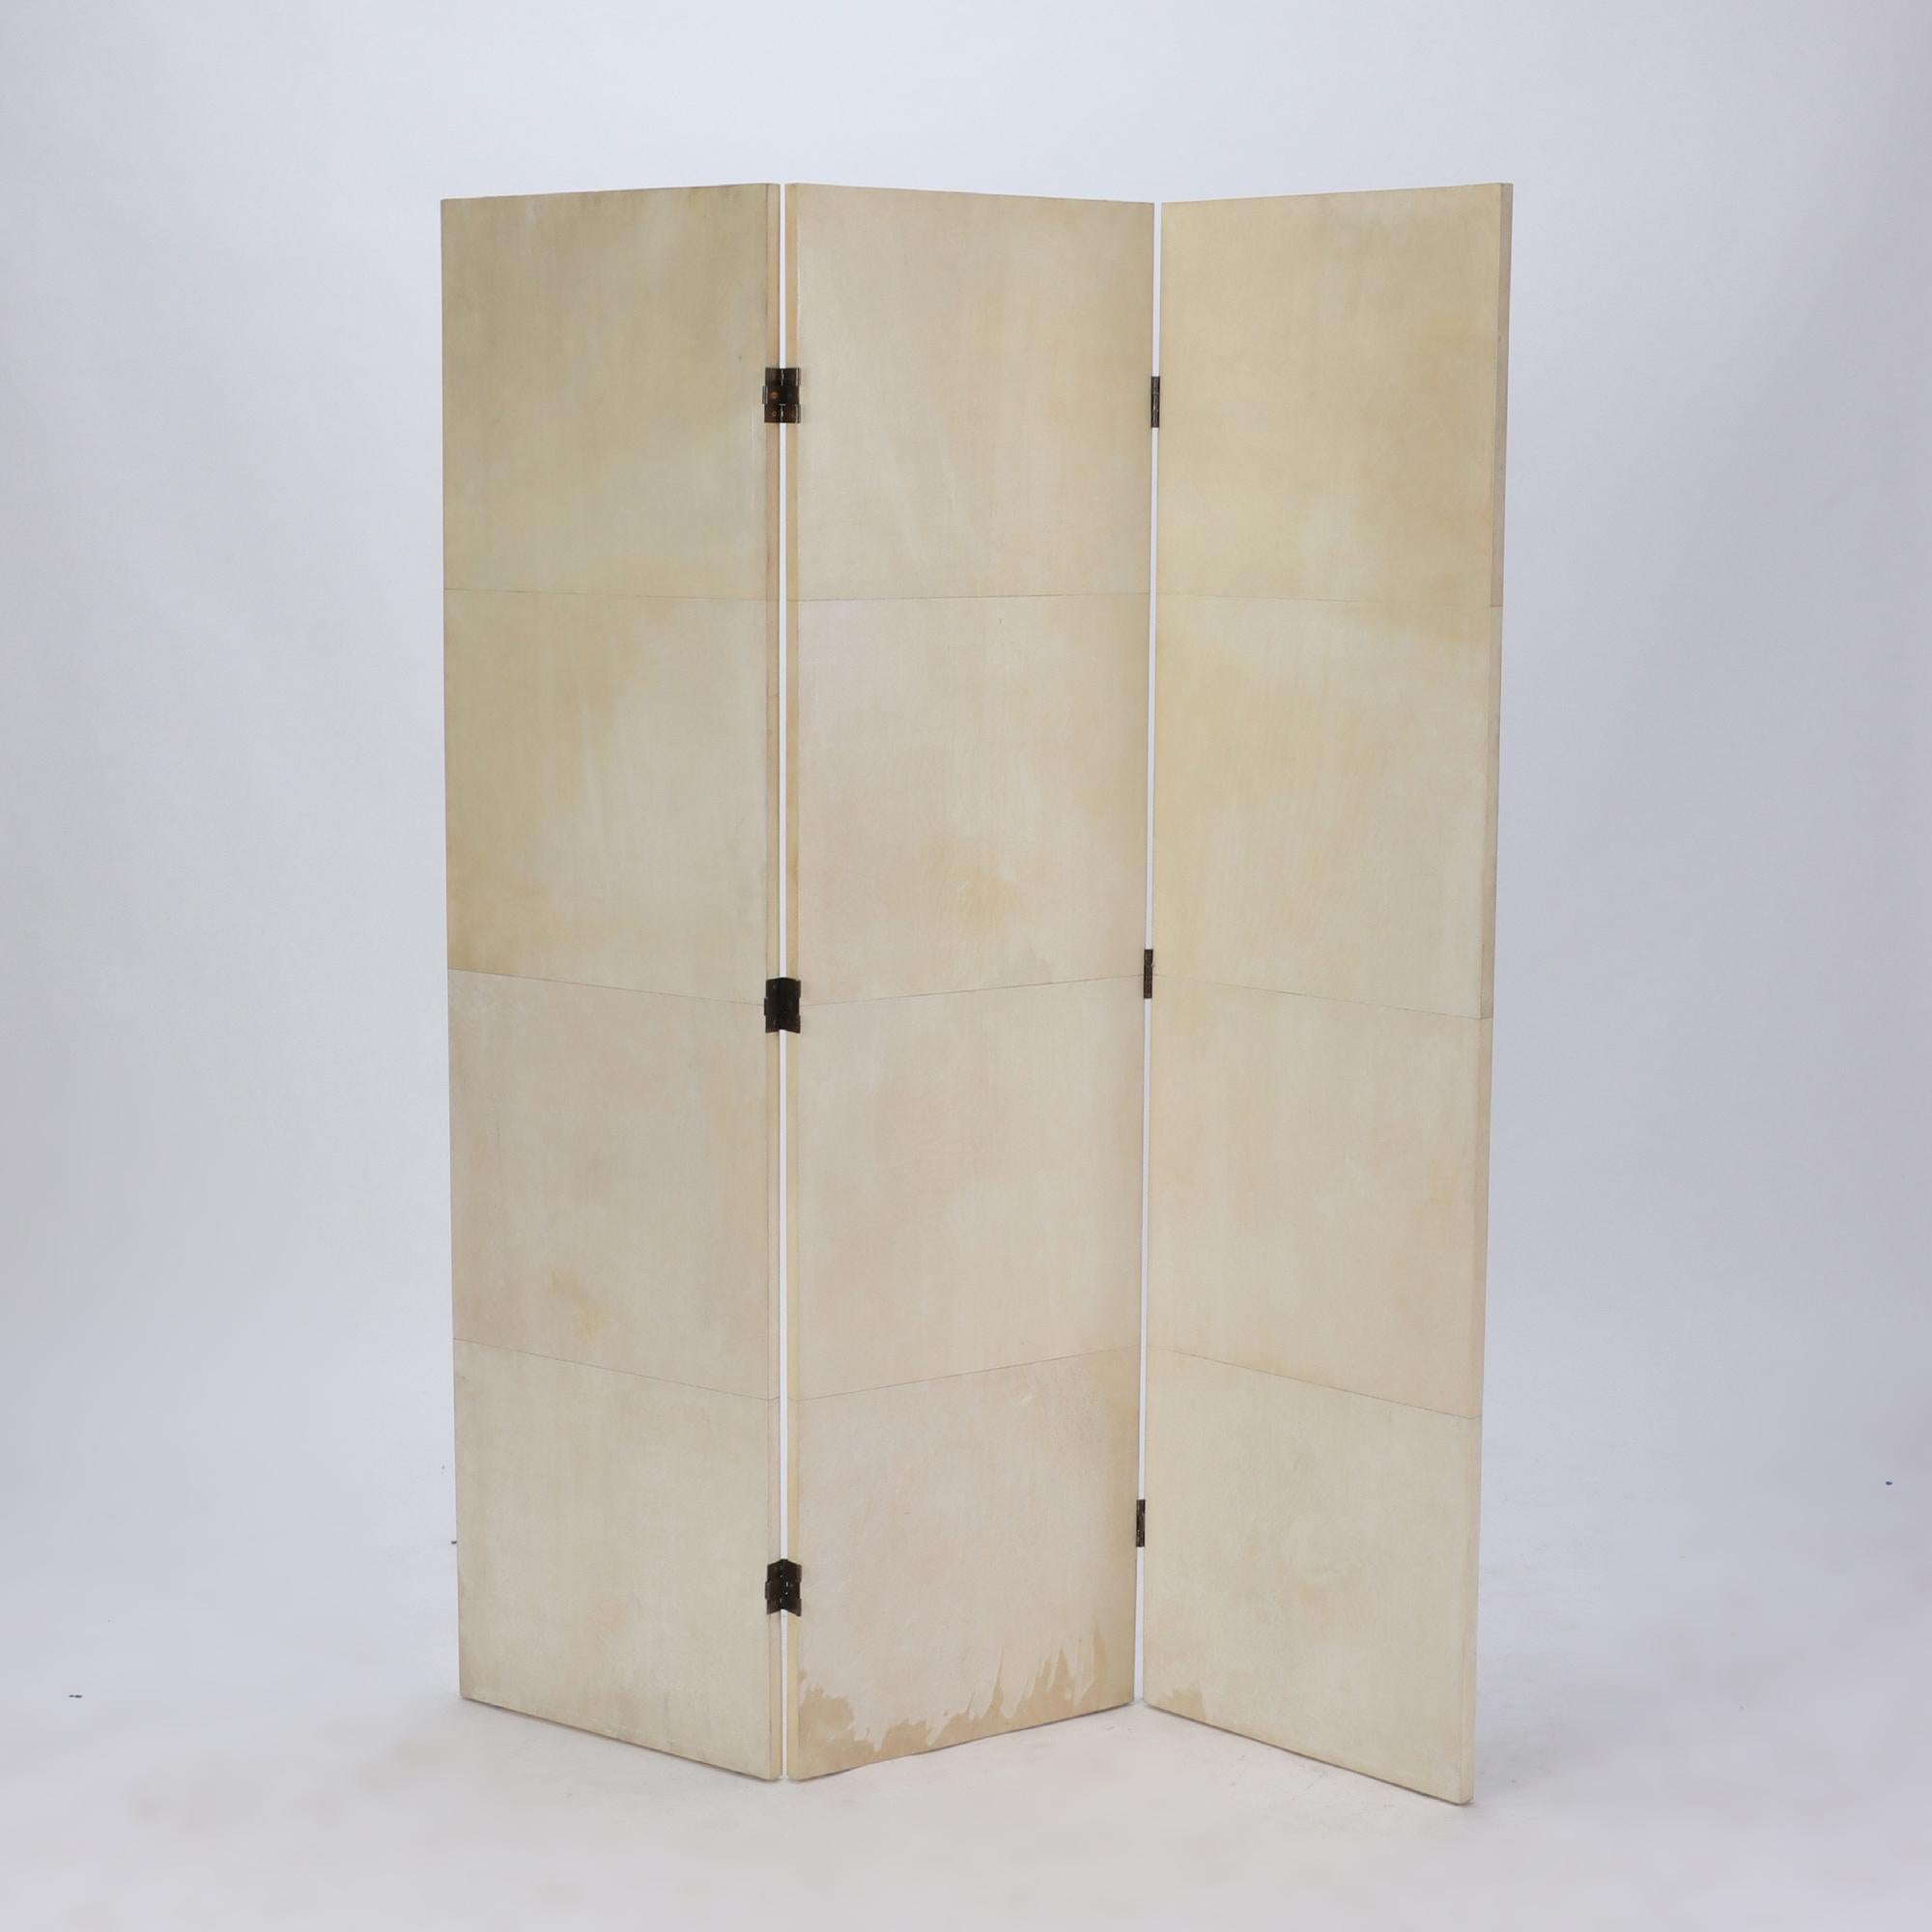 A parchment covered three panel folding screen. Contemporary. Available in custom made sizes.
Each screen is 58.5